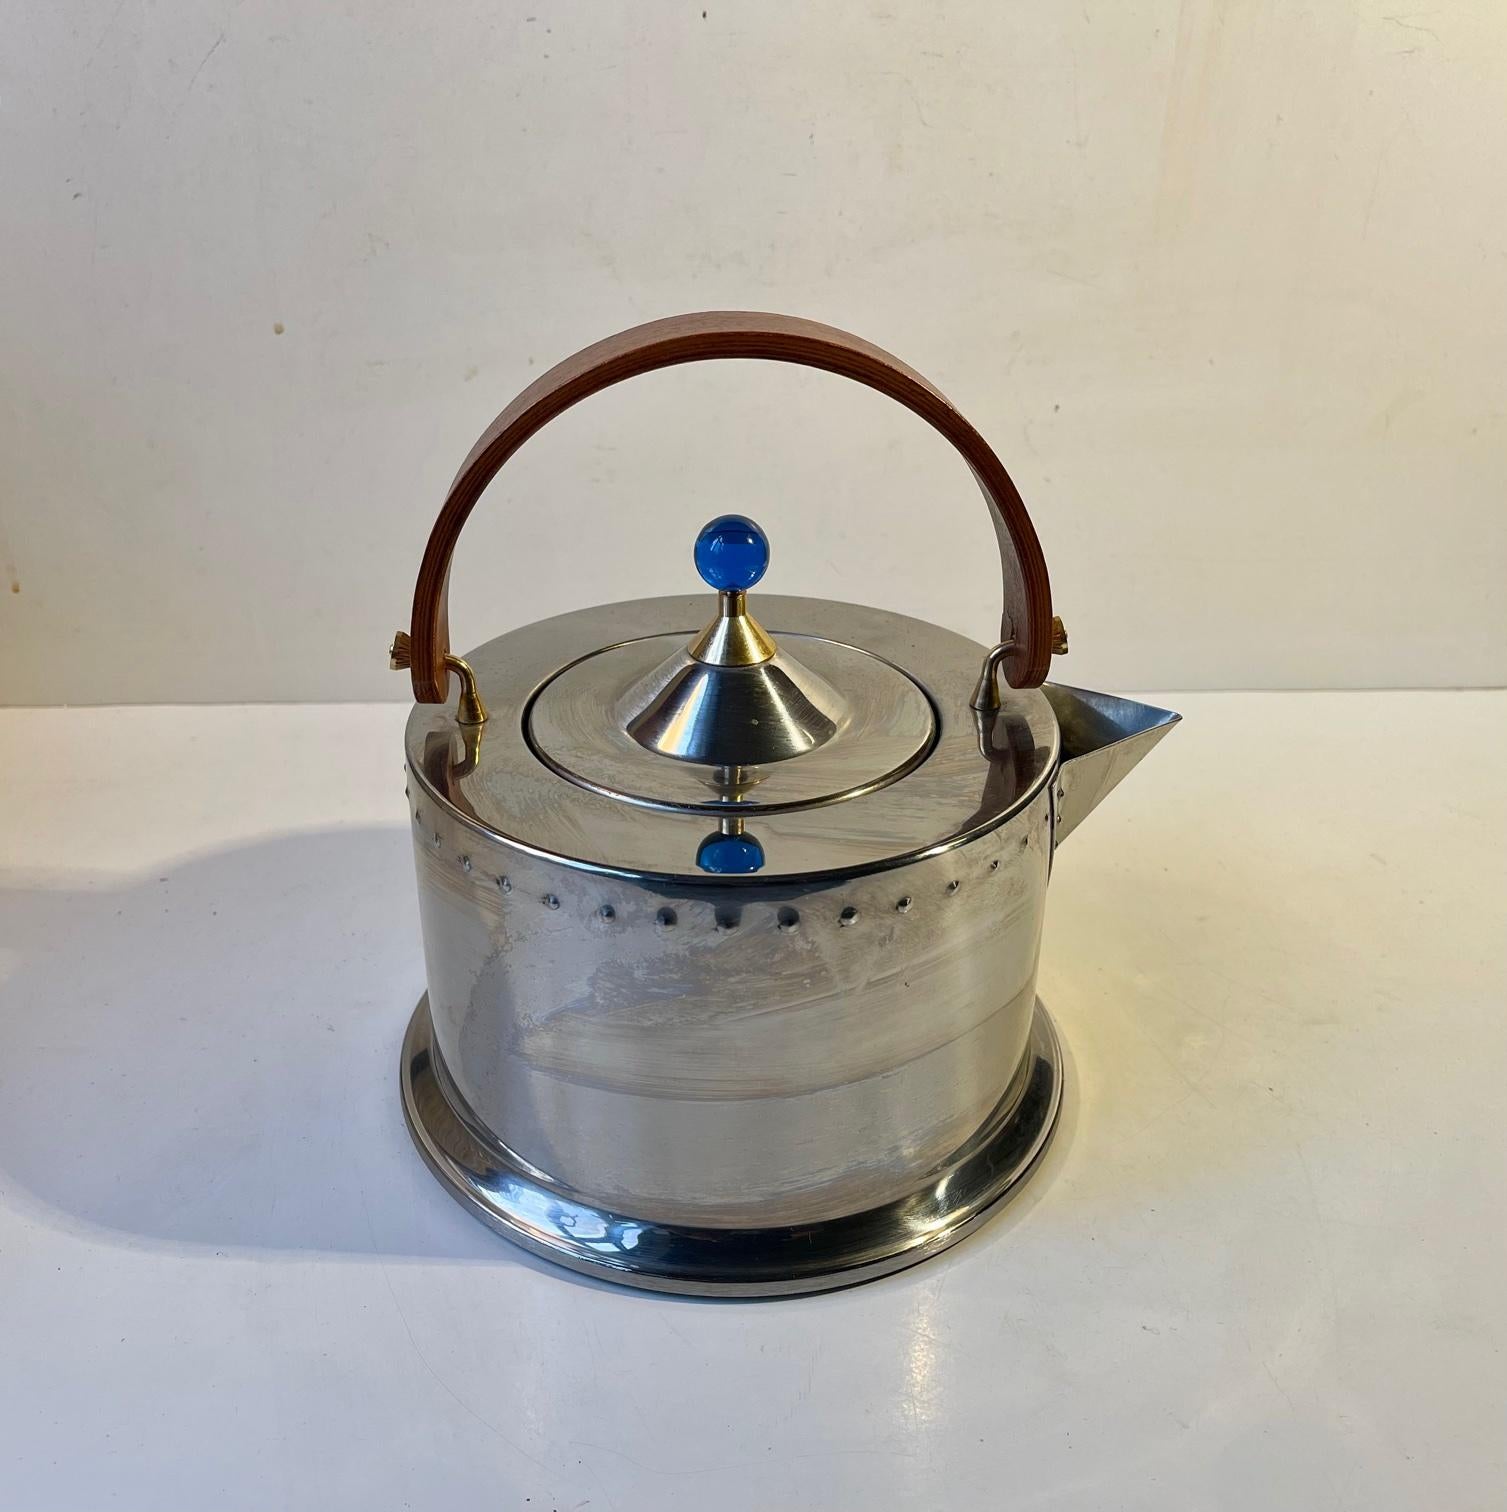 Vintage Memphis style inspired teapot in stainless steel, brass, blue lucite and mahogany bentwood. Designed by Danish C. Jørgensen and manufactured in Italy (probably Alessi) for Bodum - Denmark, It has a capacity of 1 liter and measures 19 cm in